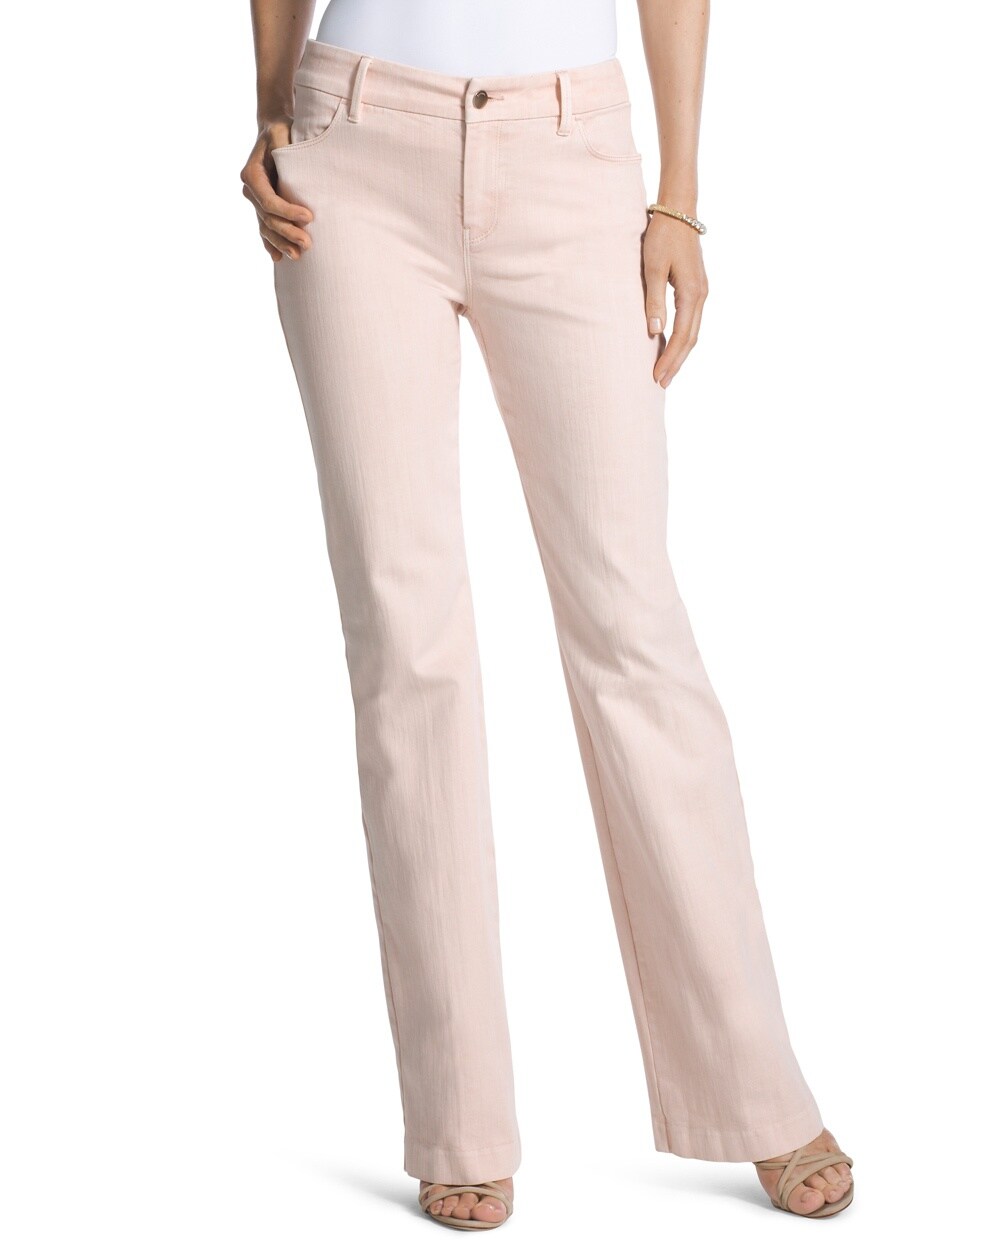 Platinum Flare Jeans in Blush Pink